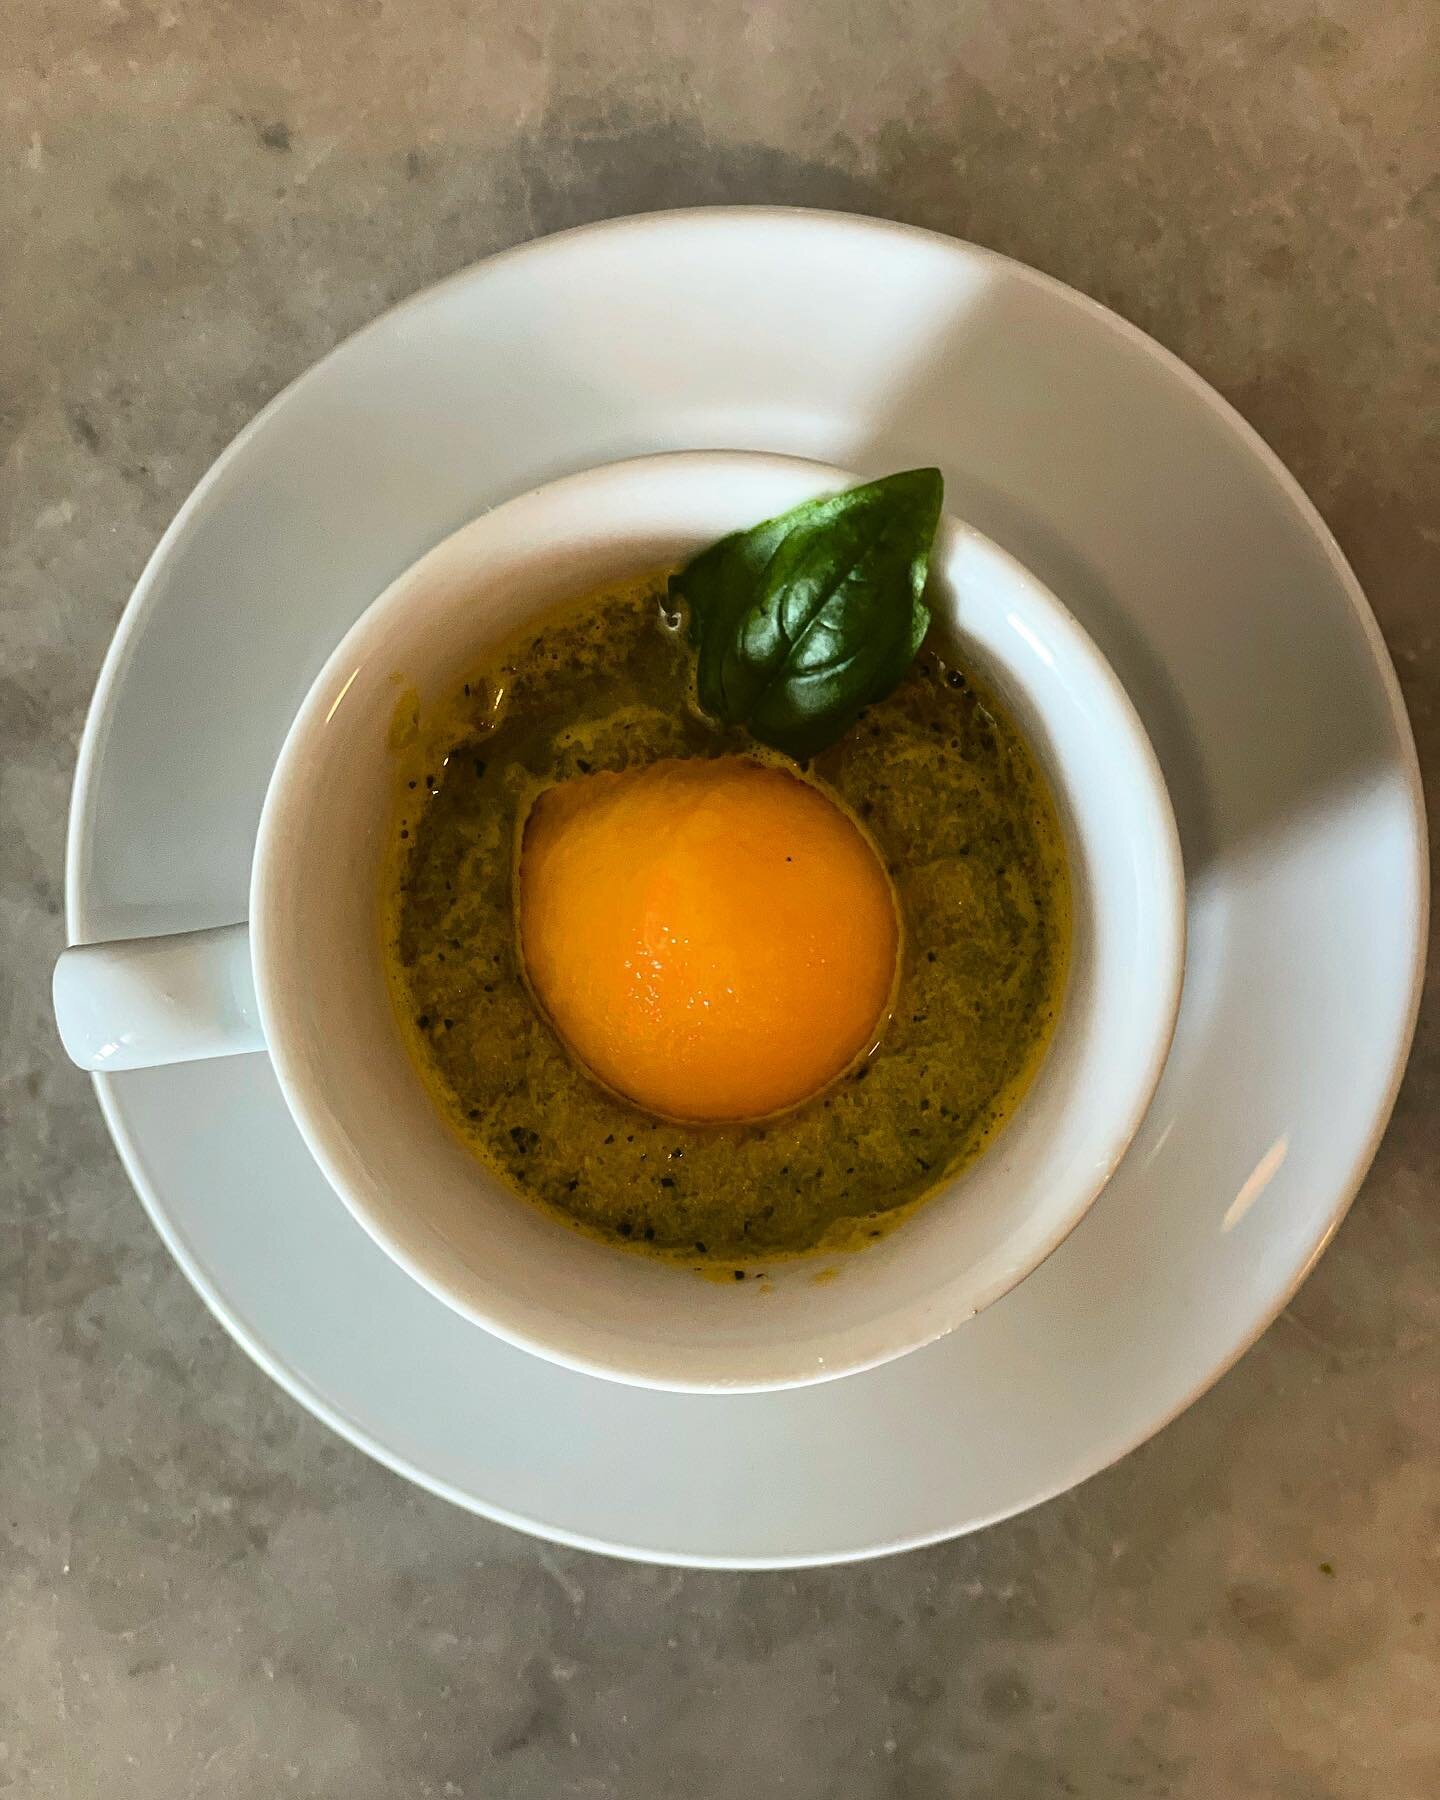 Preparing for tonight&rsquo;s dinner. 
Melon soup recipe of @venise_en_provence. 

A blend of fresh melons, extra virgin olive oil and fresh basil.

Visit Giuseppina Mablia&rsquo;s page to find her online recipe book.

#veniseenprovence #summerentert